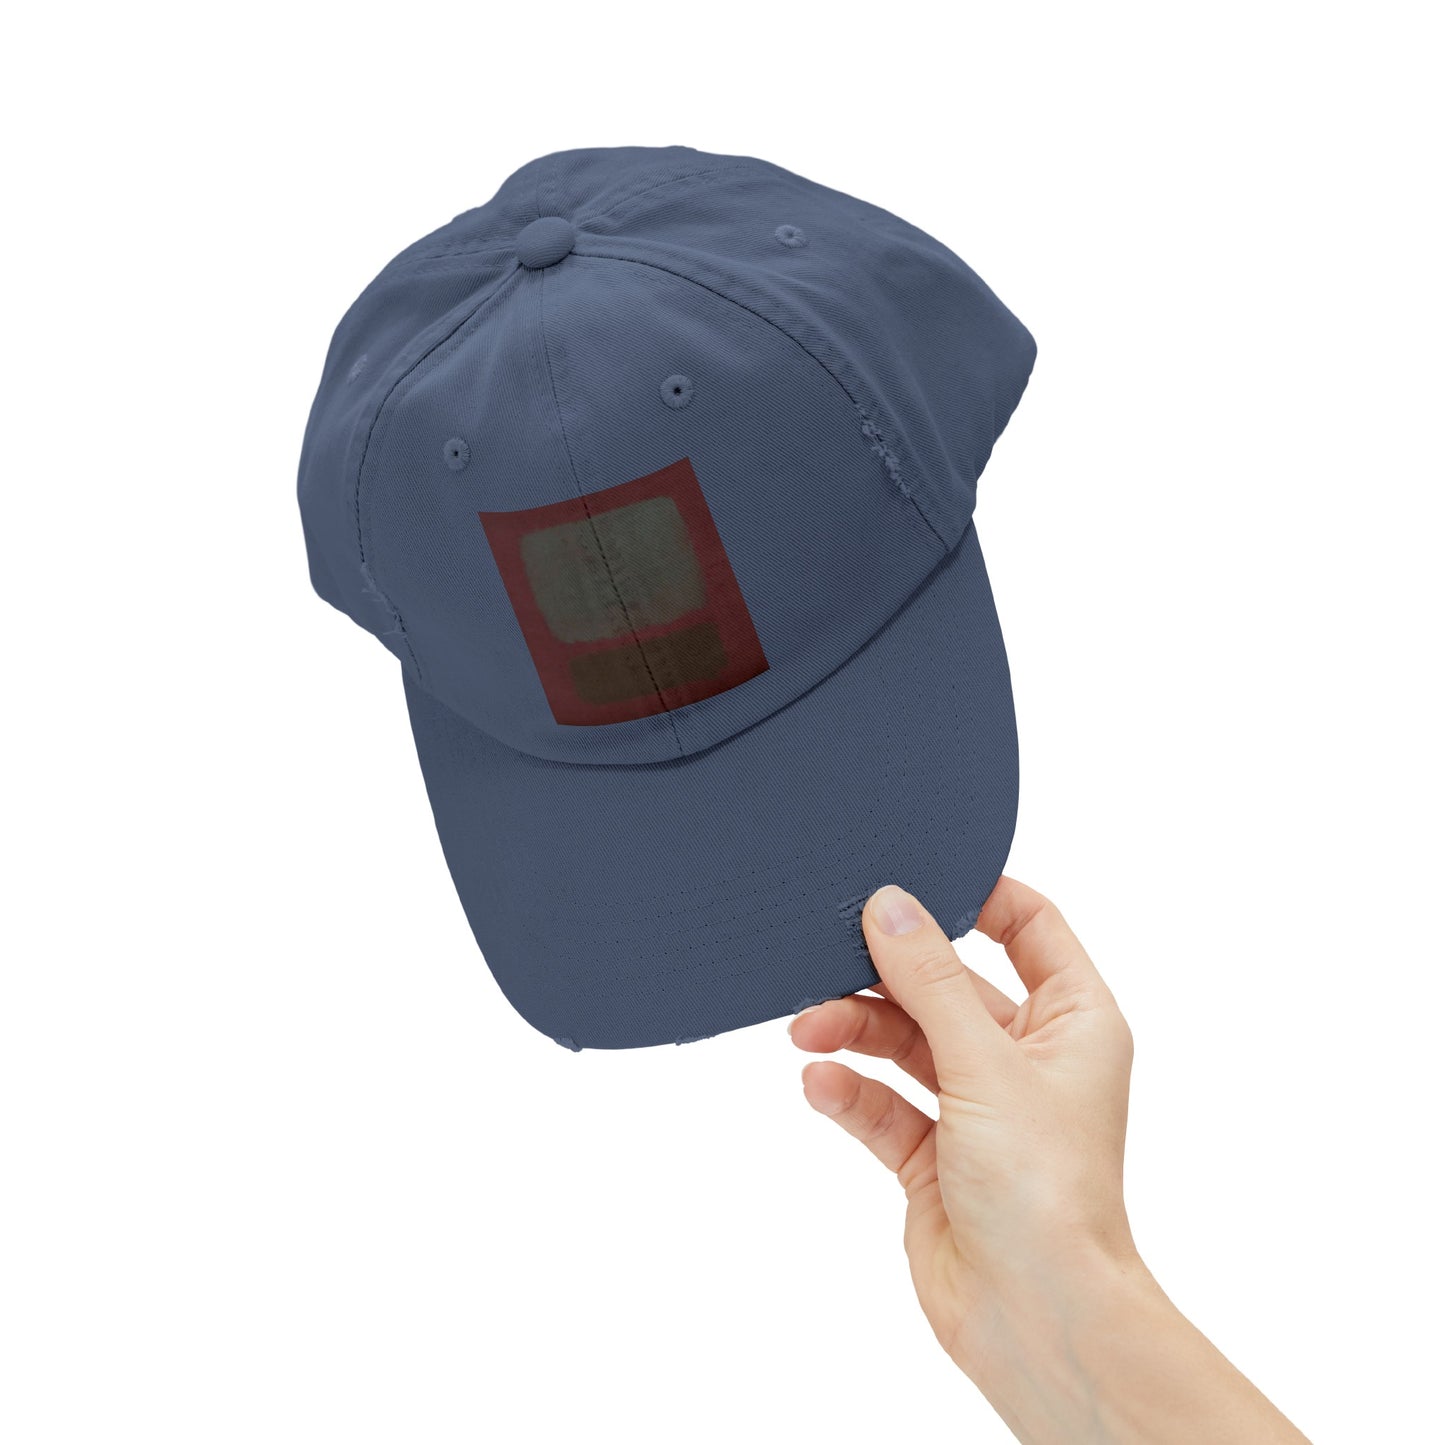 a hand holding a blue hat with a red square on it